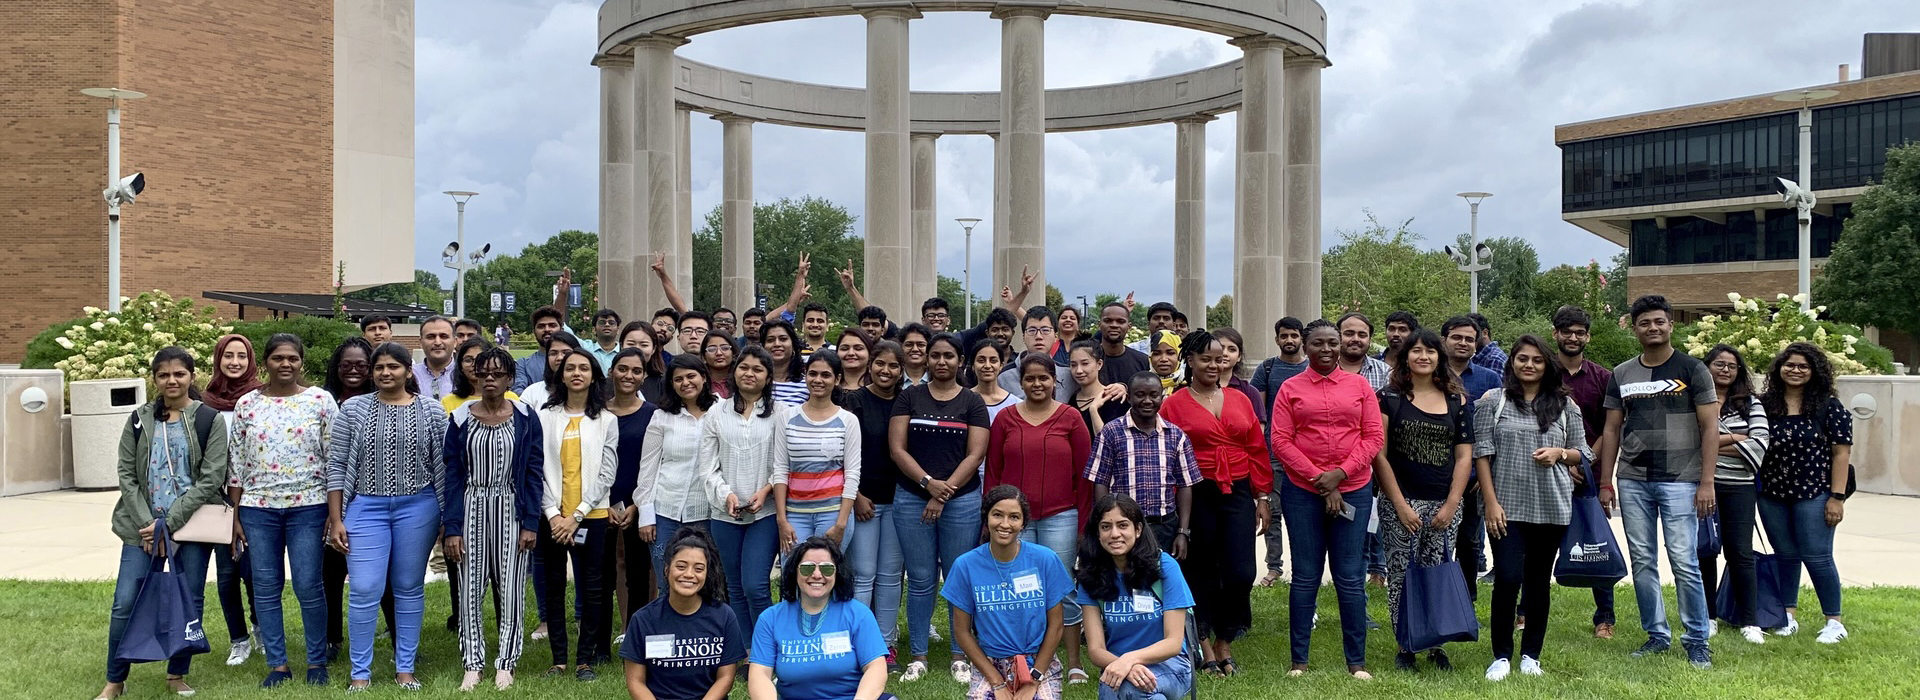 group photo of many international students posing in front of the colonnade